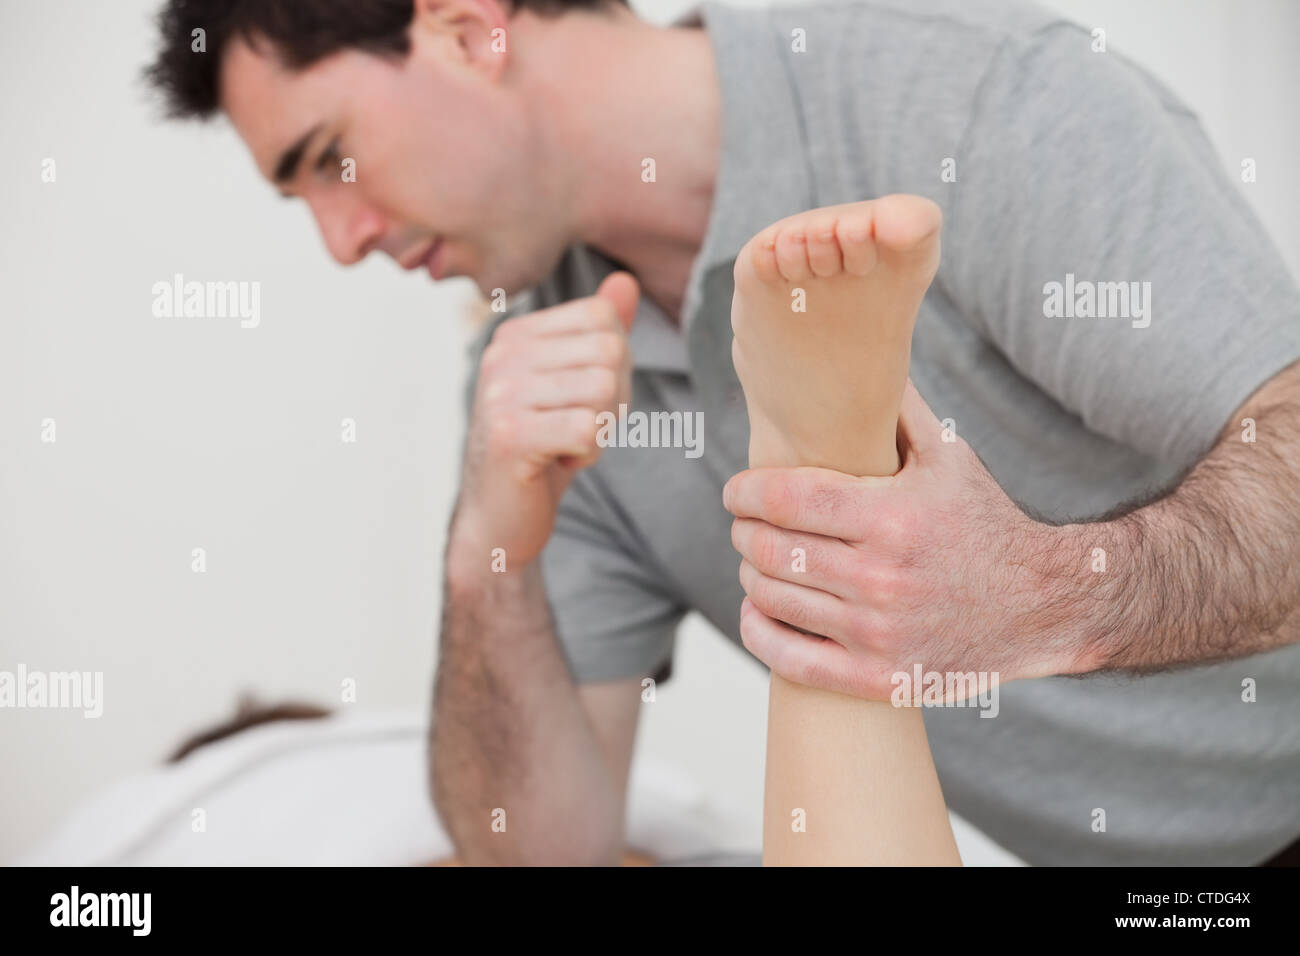 Physio manipulating the leg of a patient Stock Photo